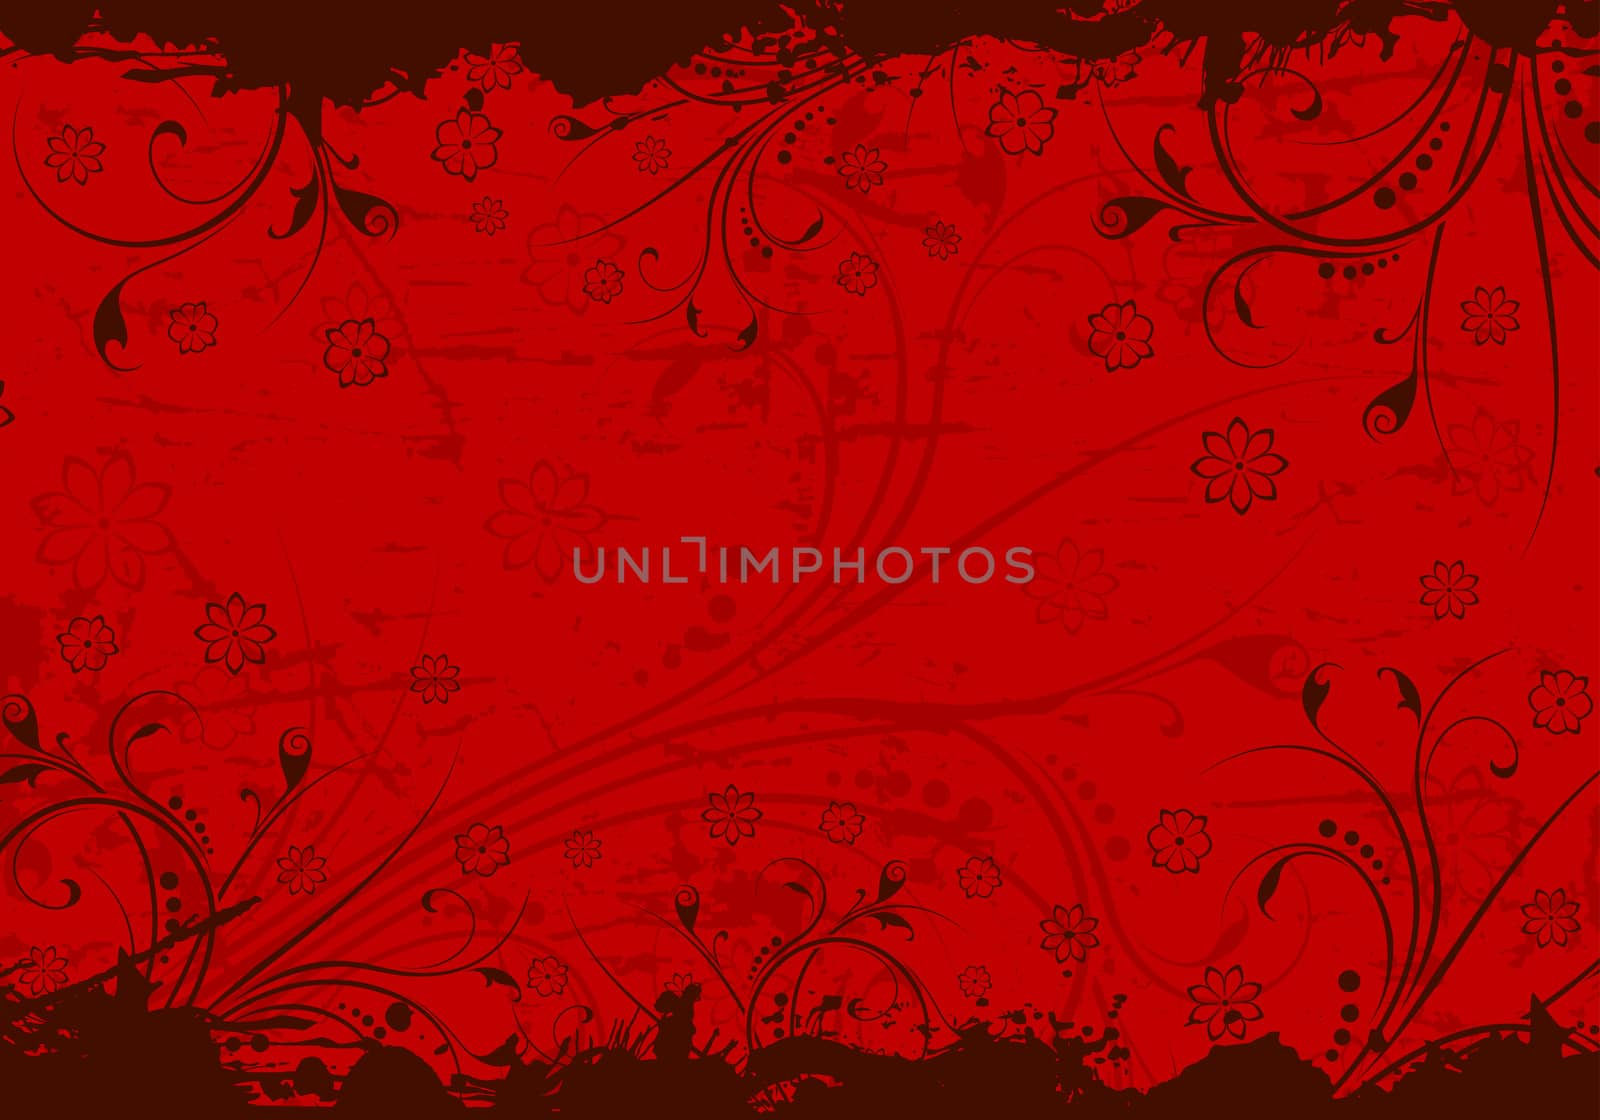 Abstract grunge background with floral scrolls in red color